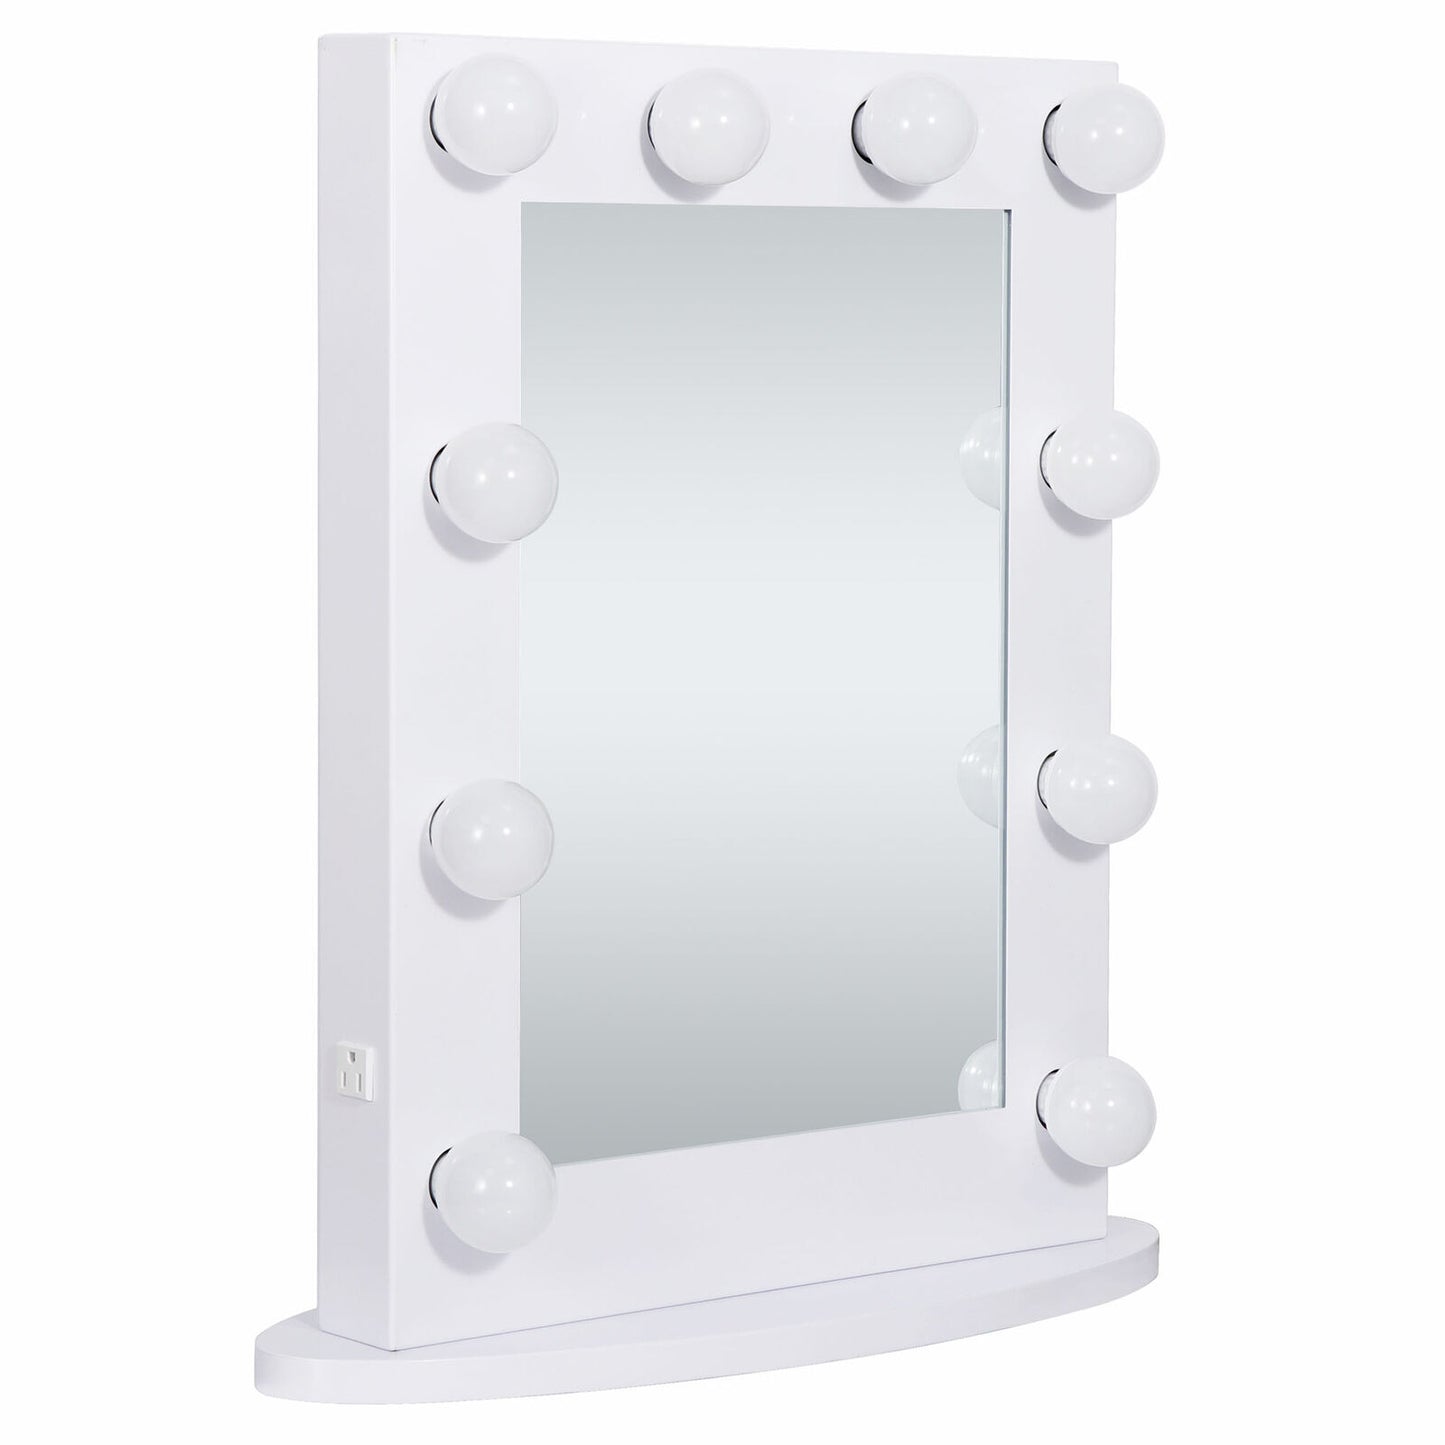 Hollywood Makeup Vanity Mirror w/Lights Bedroom Lighted Standing w/ 12 LED Bulbs